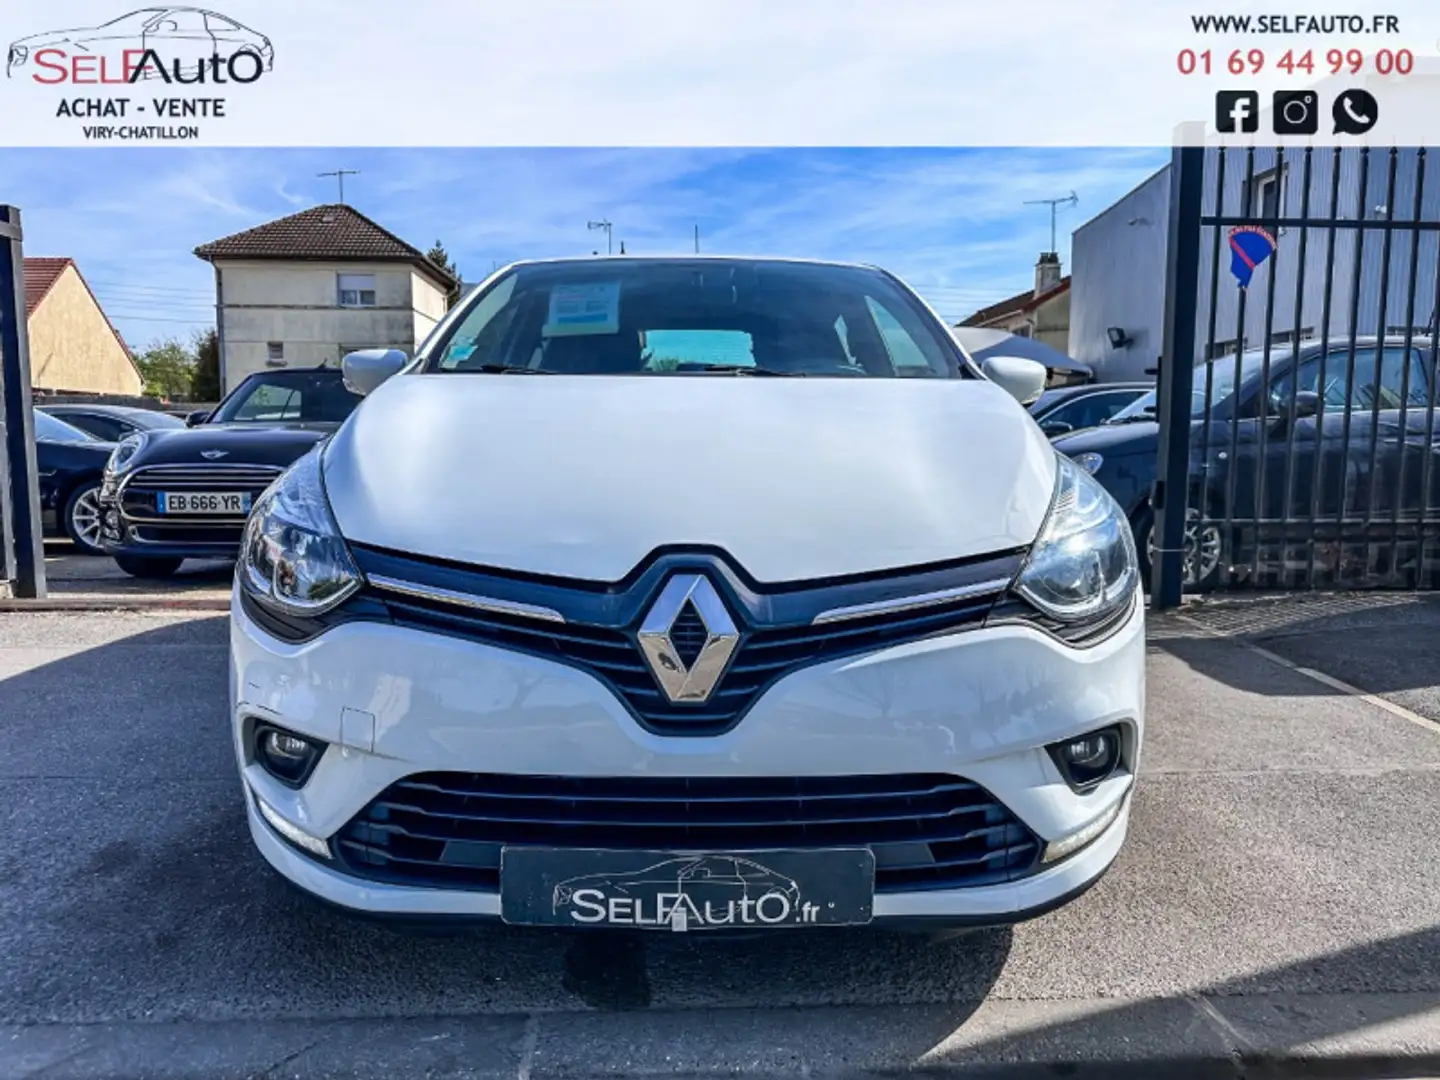 Renault Clio 1.5 DCI 90CH ENERGY BUSINESS 82G 5P - 2